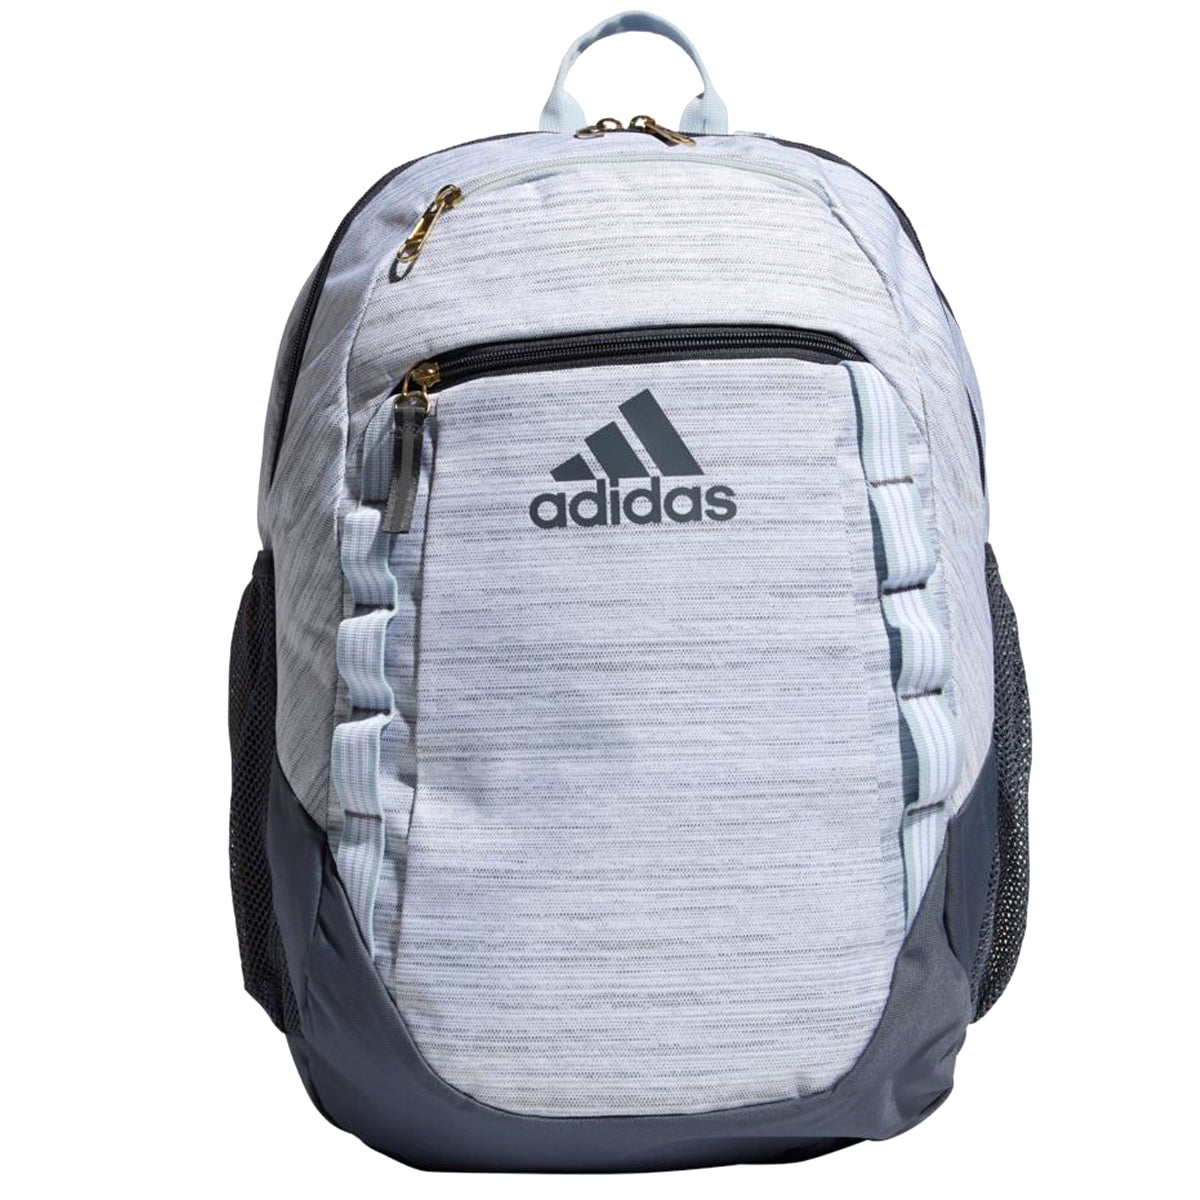 adidas Excel 6 Backpack Bags Adidas TWO TONE WHITE/HALO BLUE OSFA 